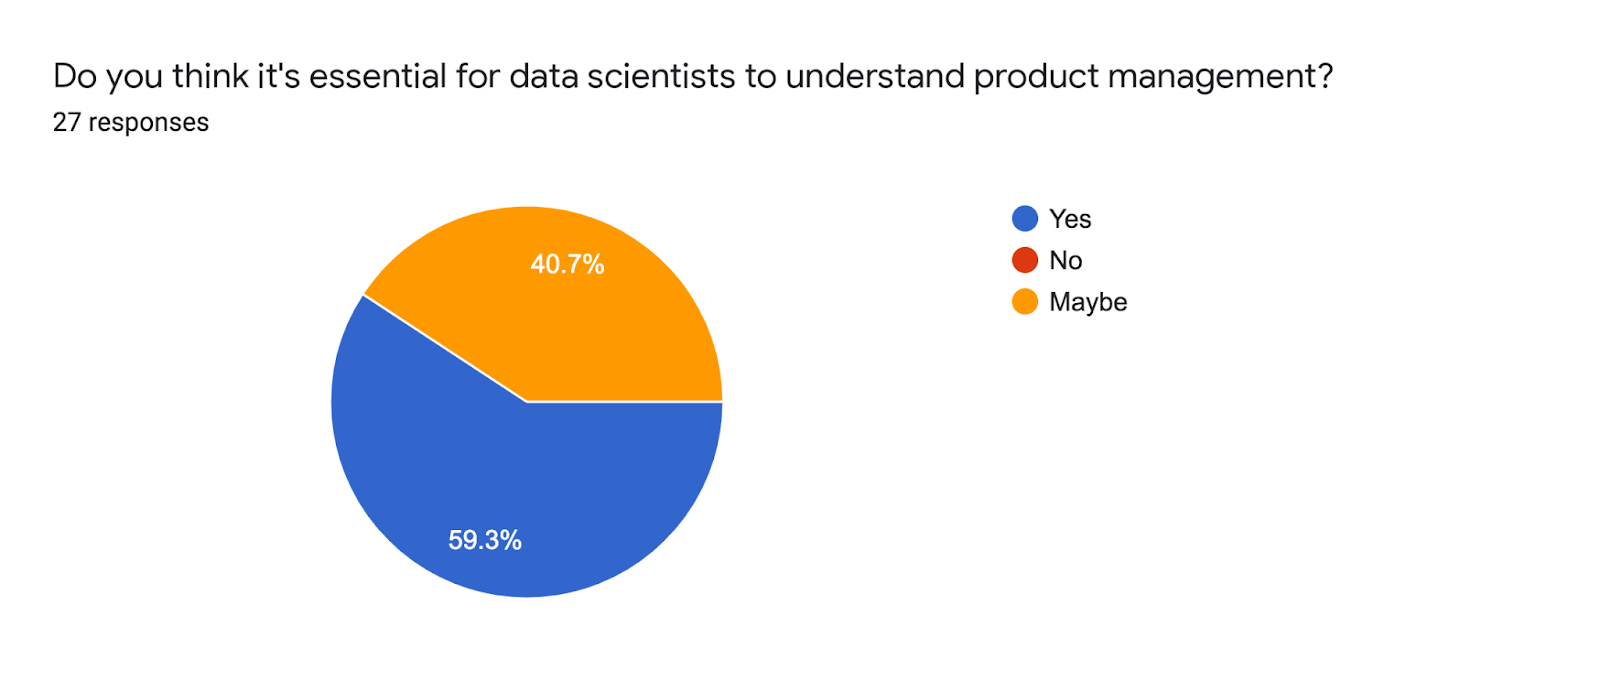 Forms response chart. Question title: Do you think it's essential for data scientists to understand product management?. Number of responses: 27 responses.